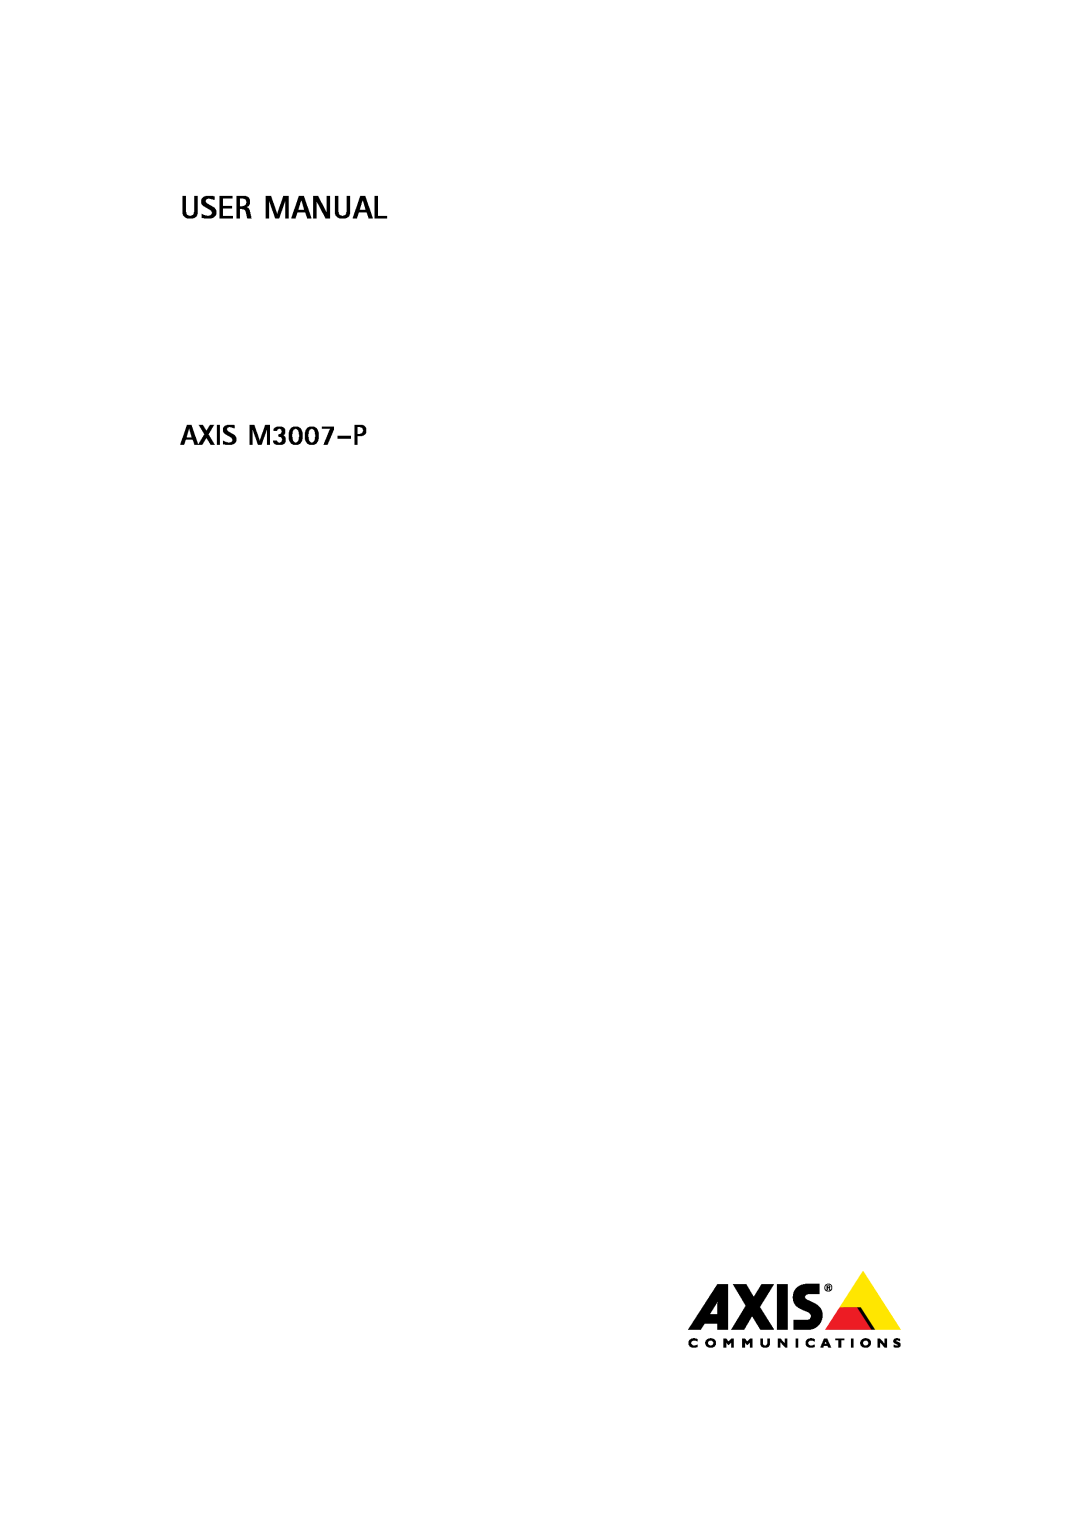 Axis Communications user manual User Manual, AXIS M3007-P 